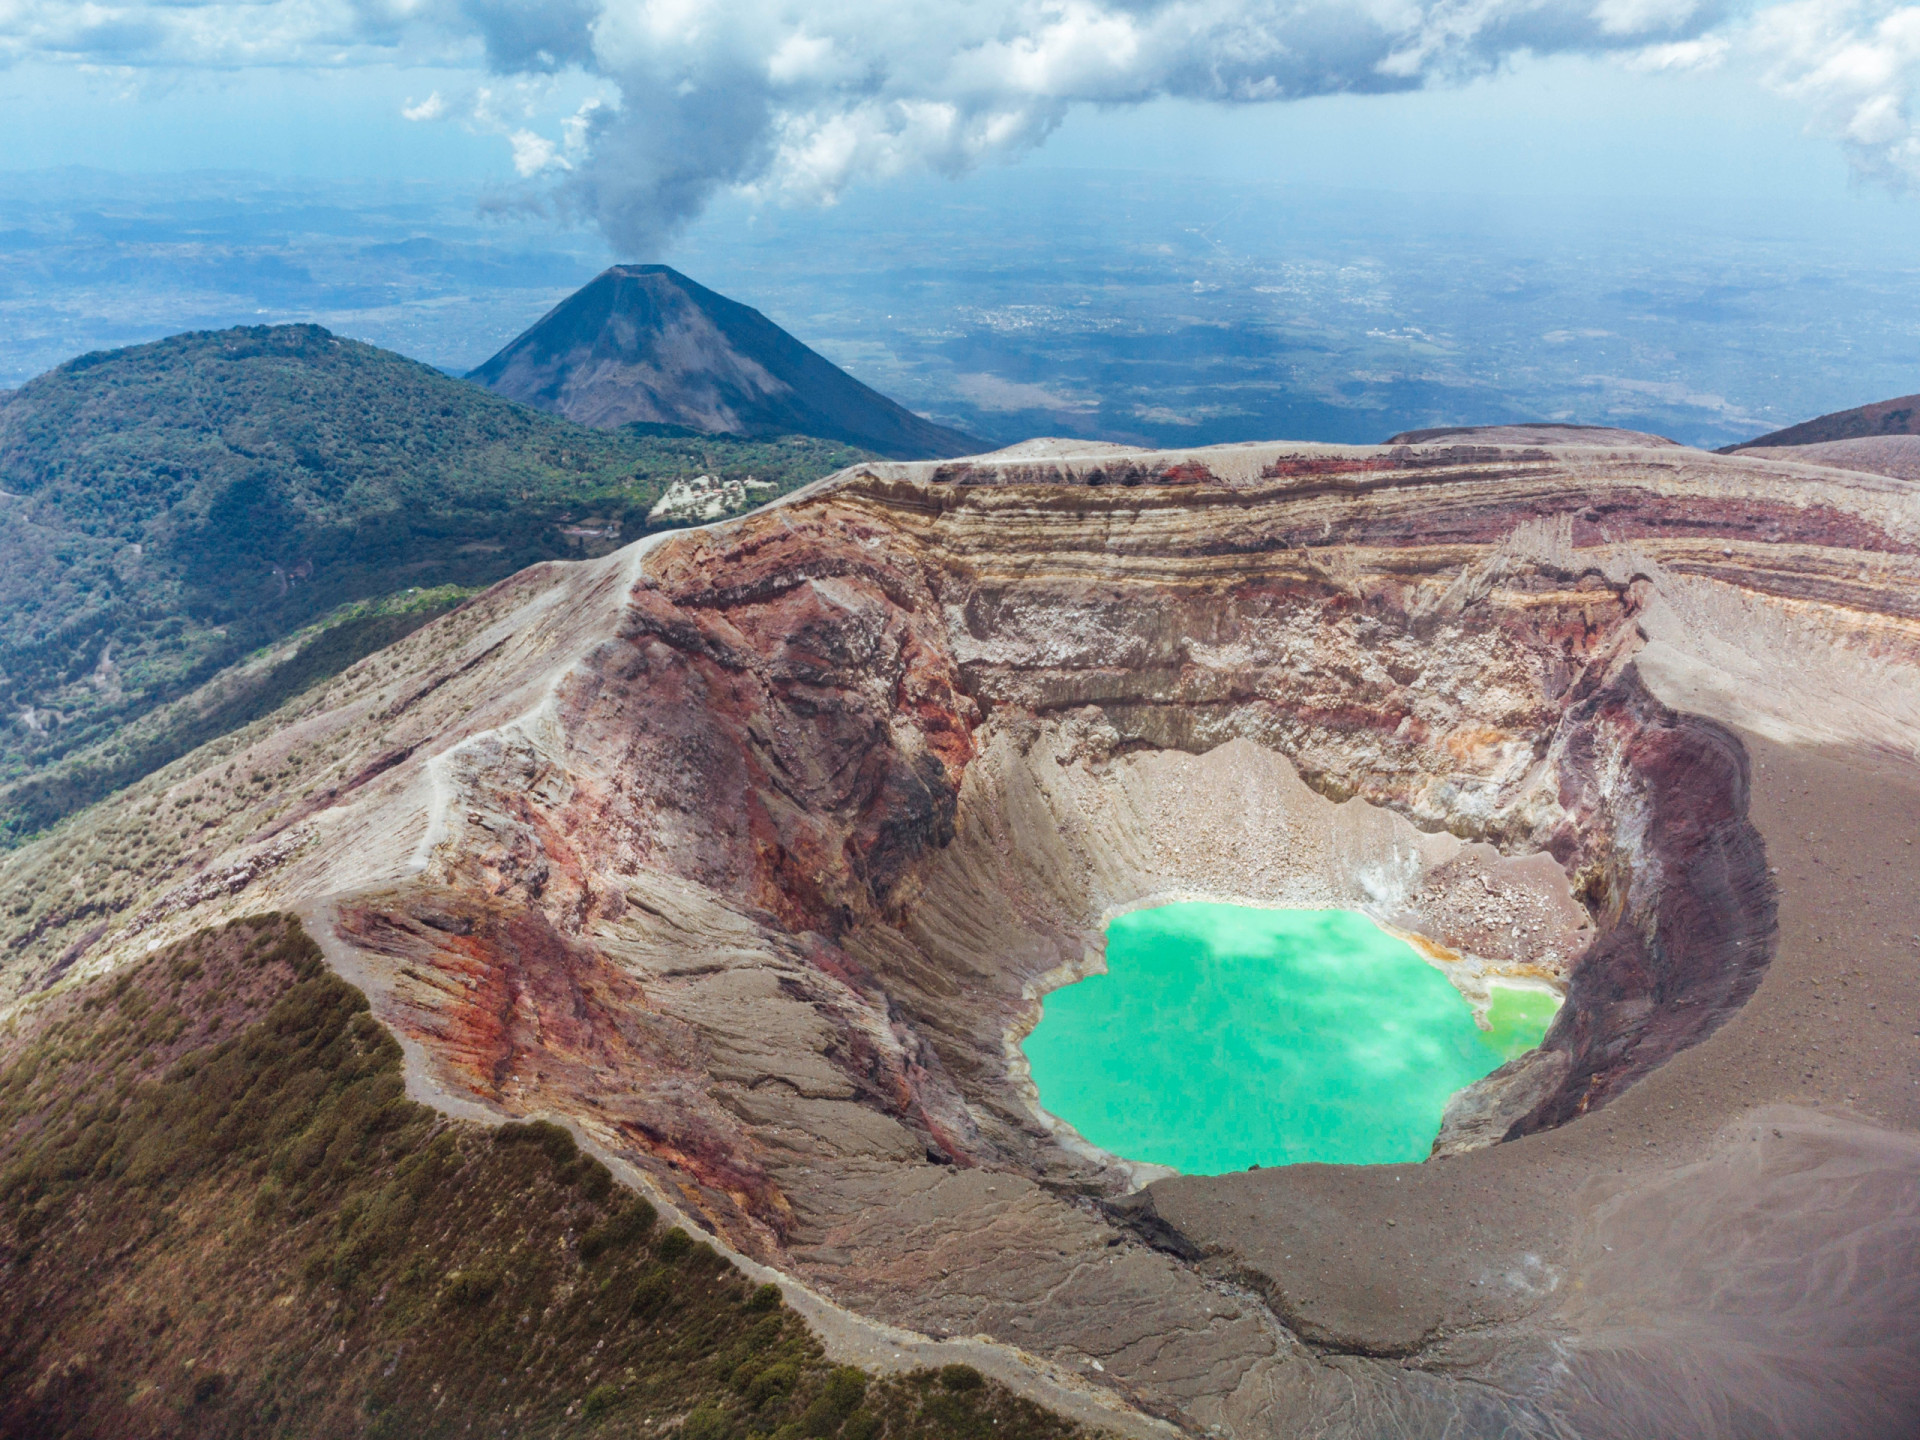 <p>Cerro Verde National Park is also known as Los Volcanes National Park for its three highlight attractions: the Cerro Verde, Izalco, and Santa Ana volcanoes. Santa Ana (pictured) is, in fact, the highest volcano in the country.</p>